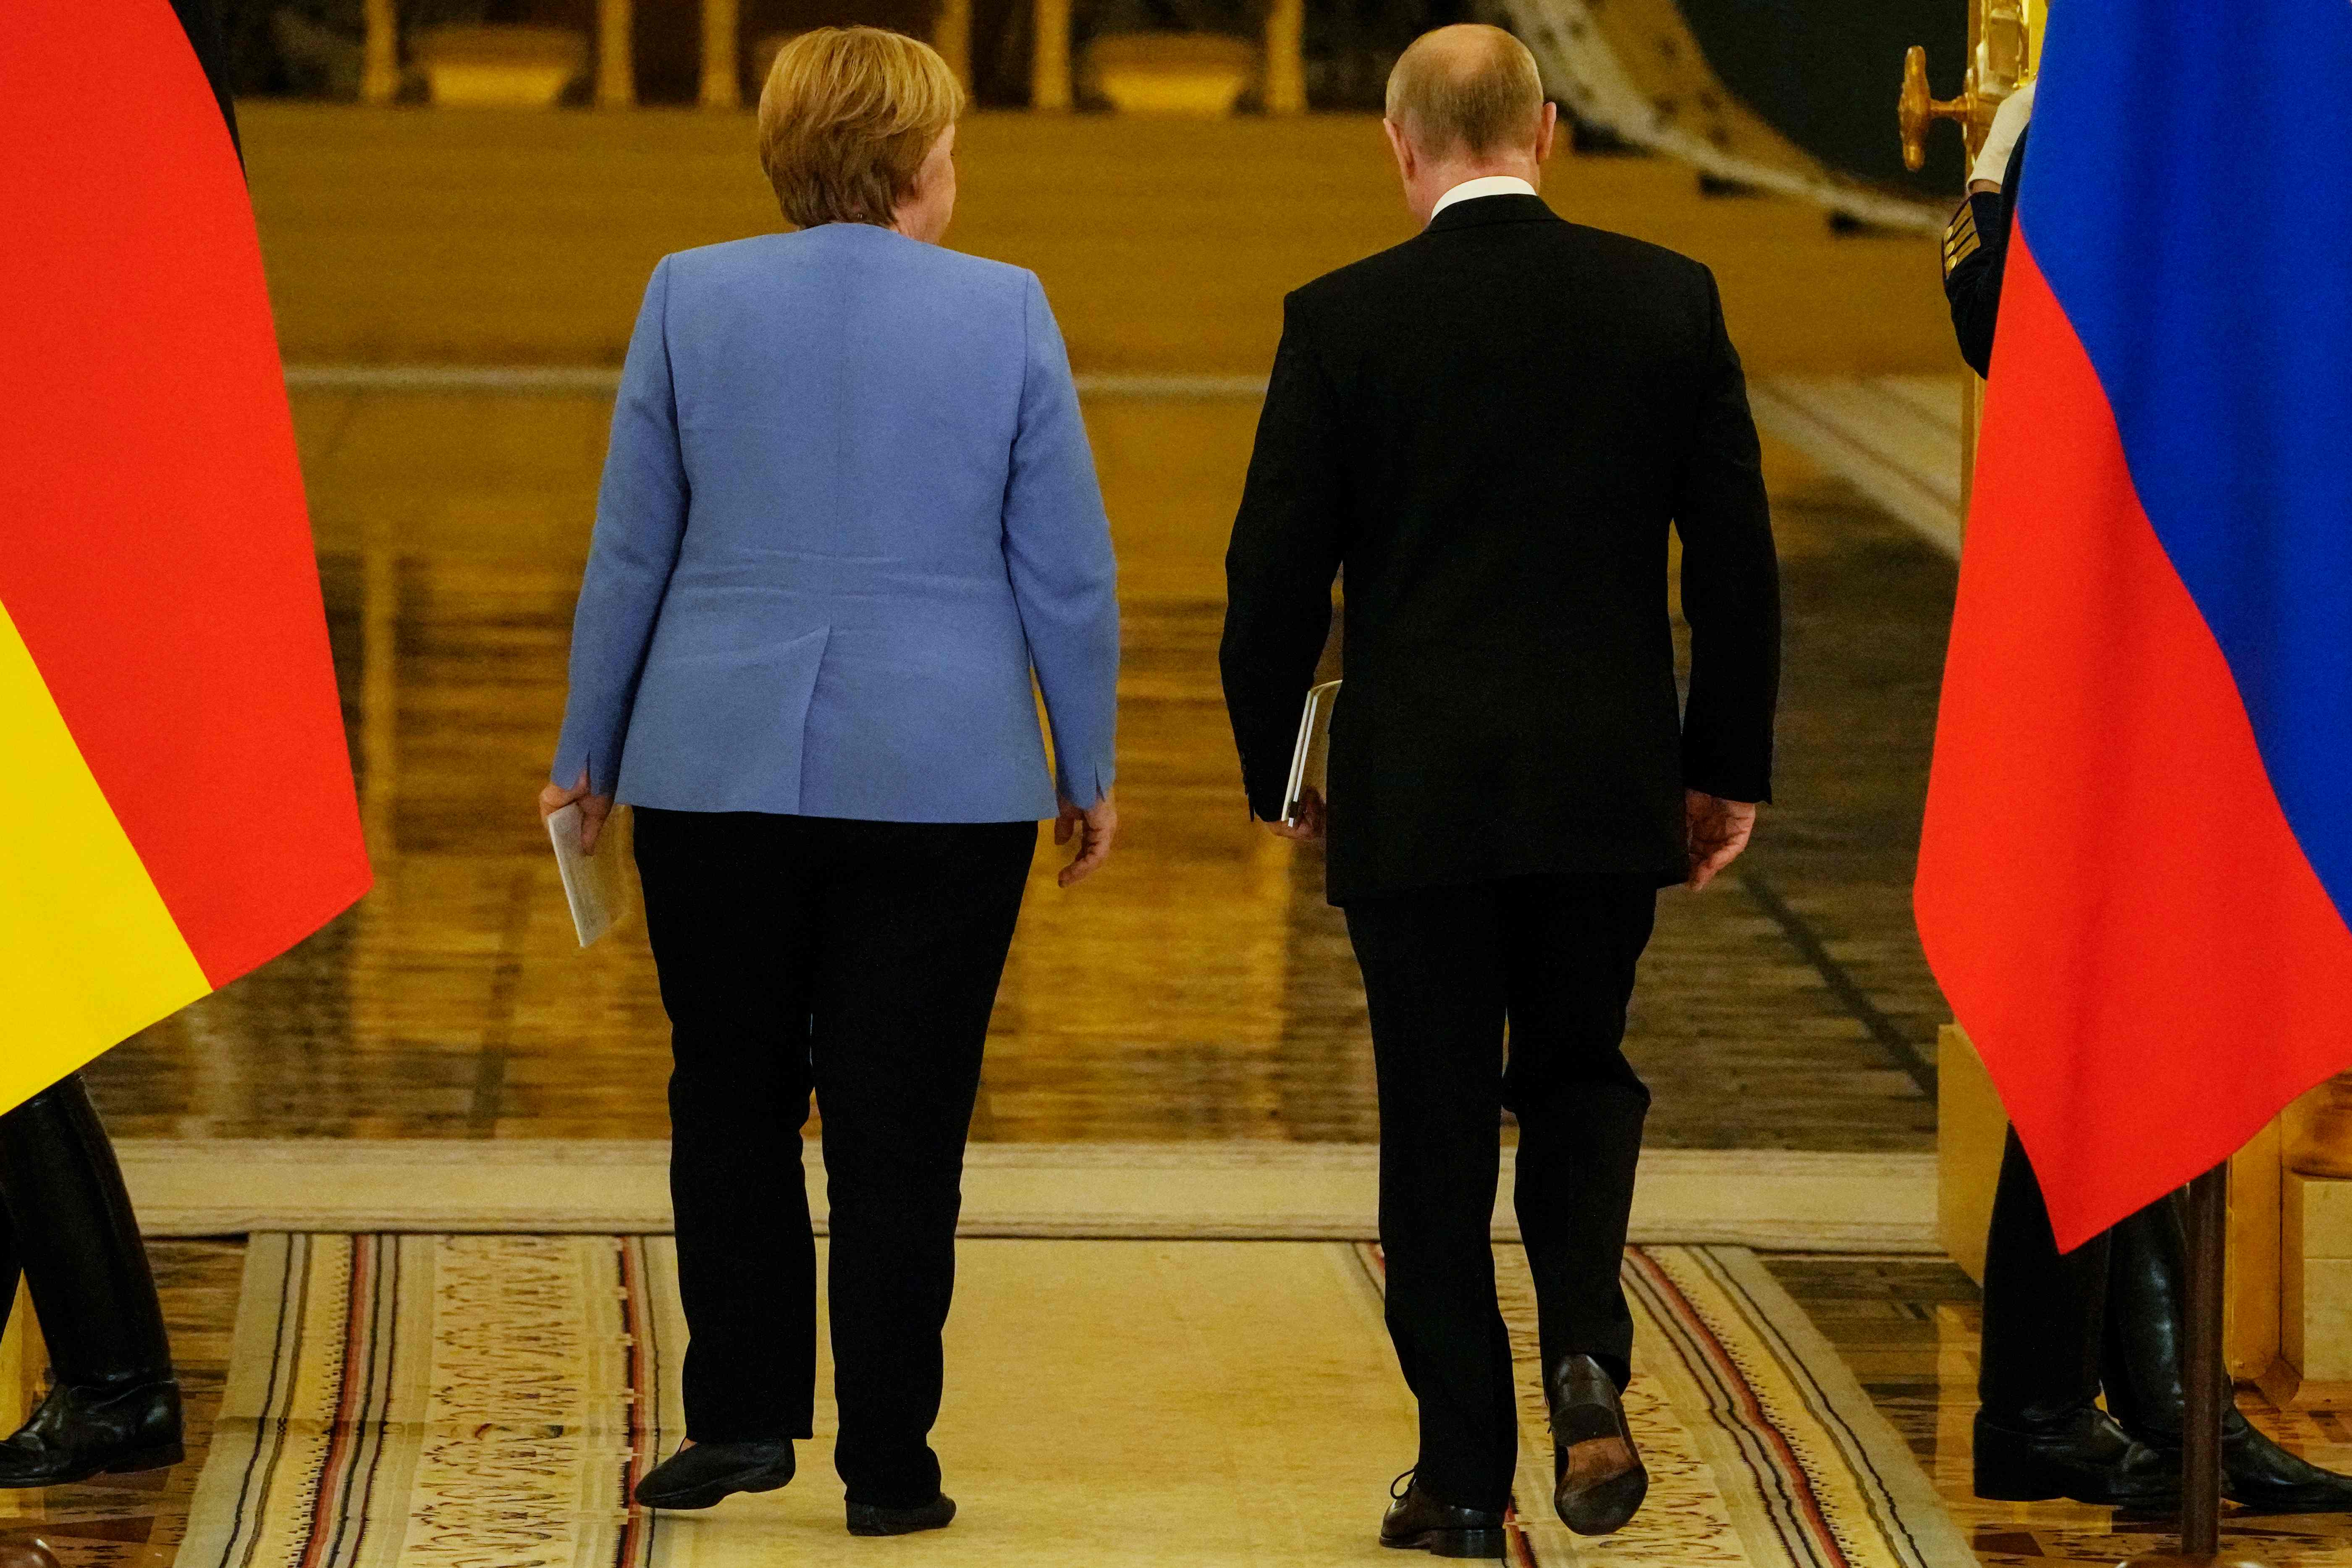 Goodbye to all that: German chancellor Angela Merkel and Russian president Vladimir Putin leave a joint news conference following their talks at the Kremlin in Moscow